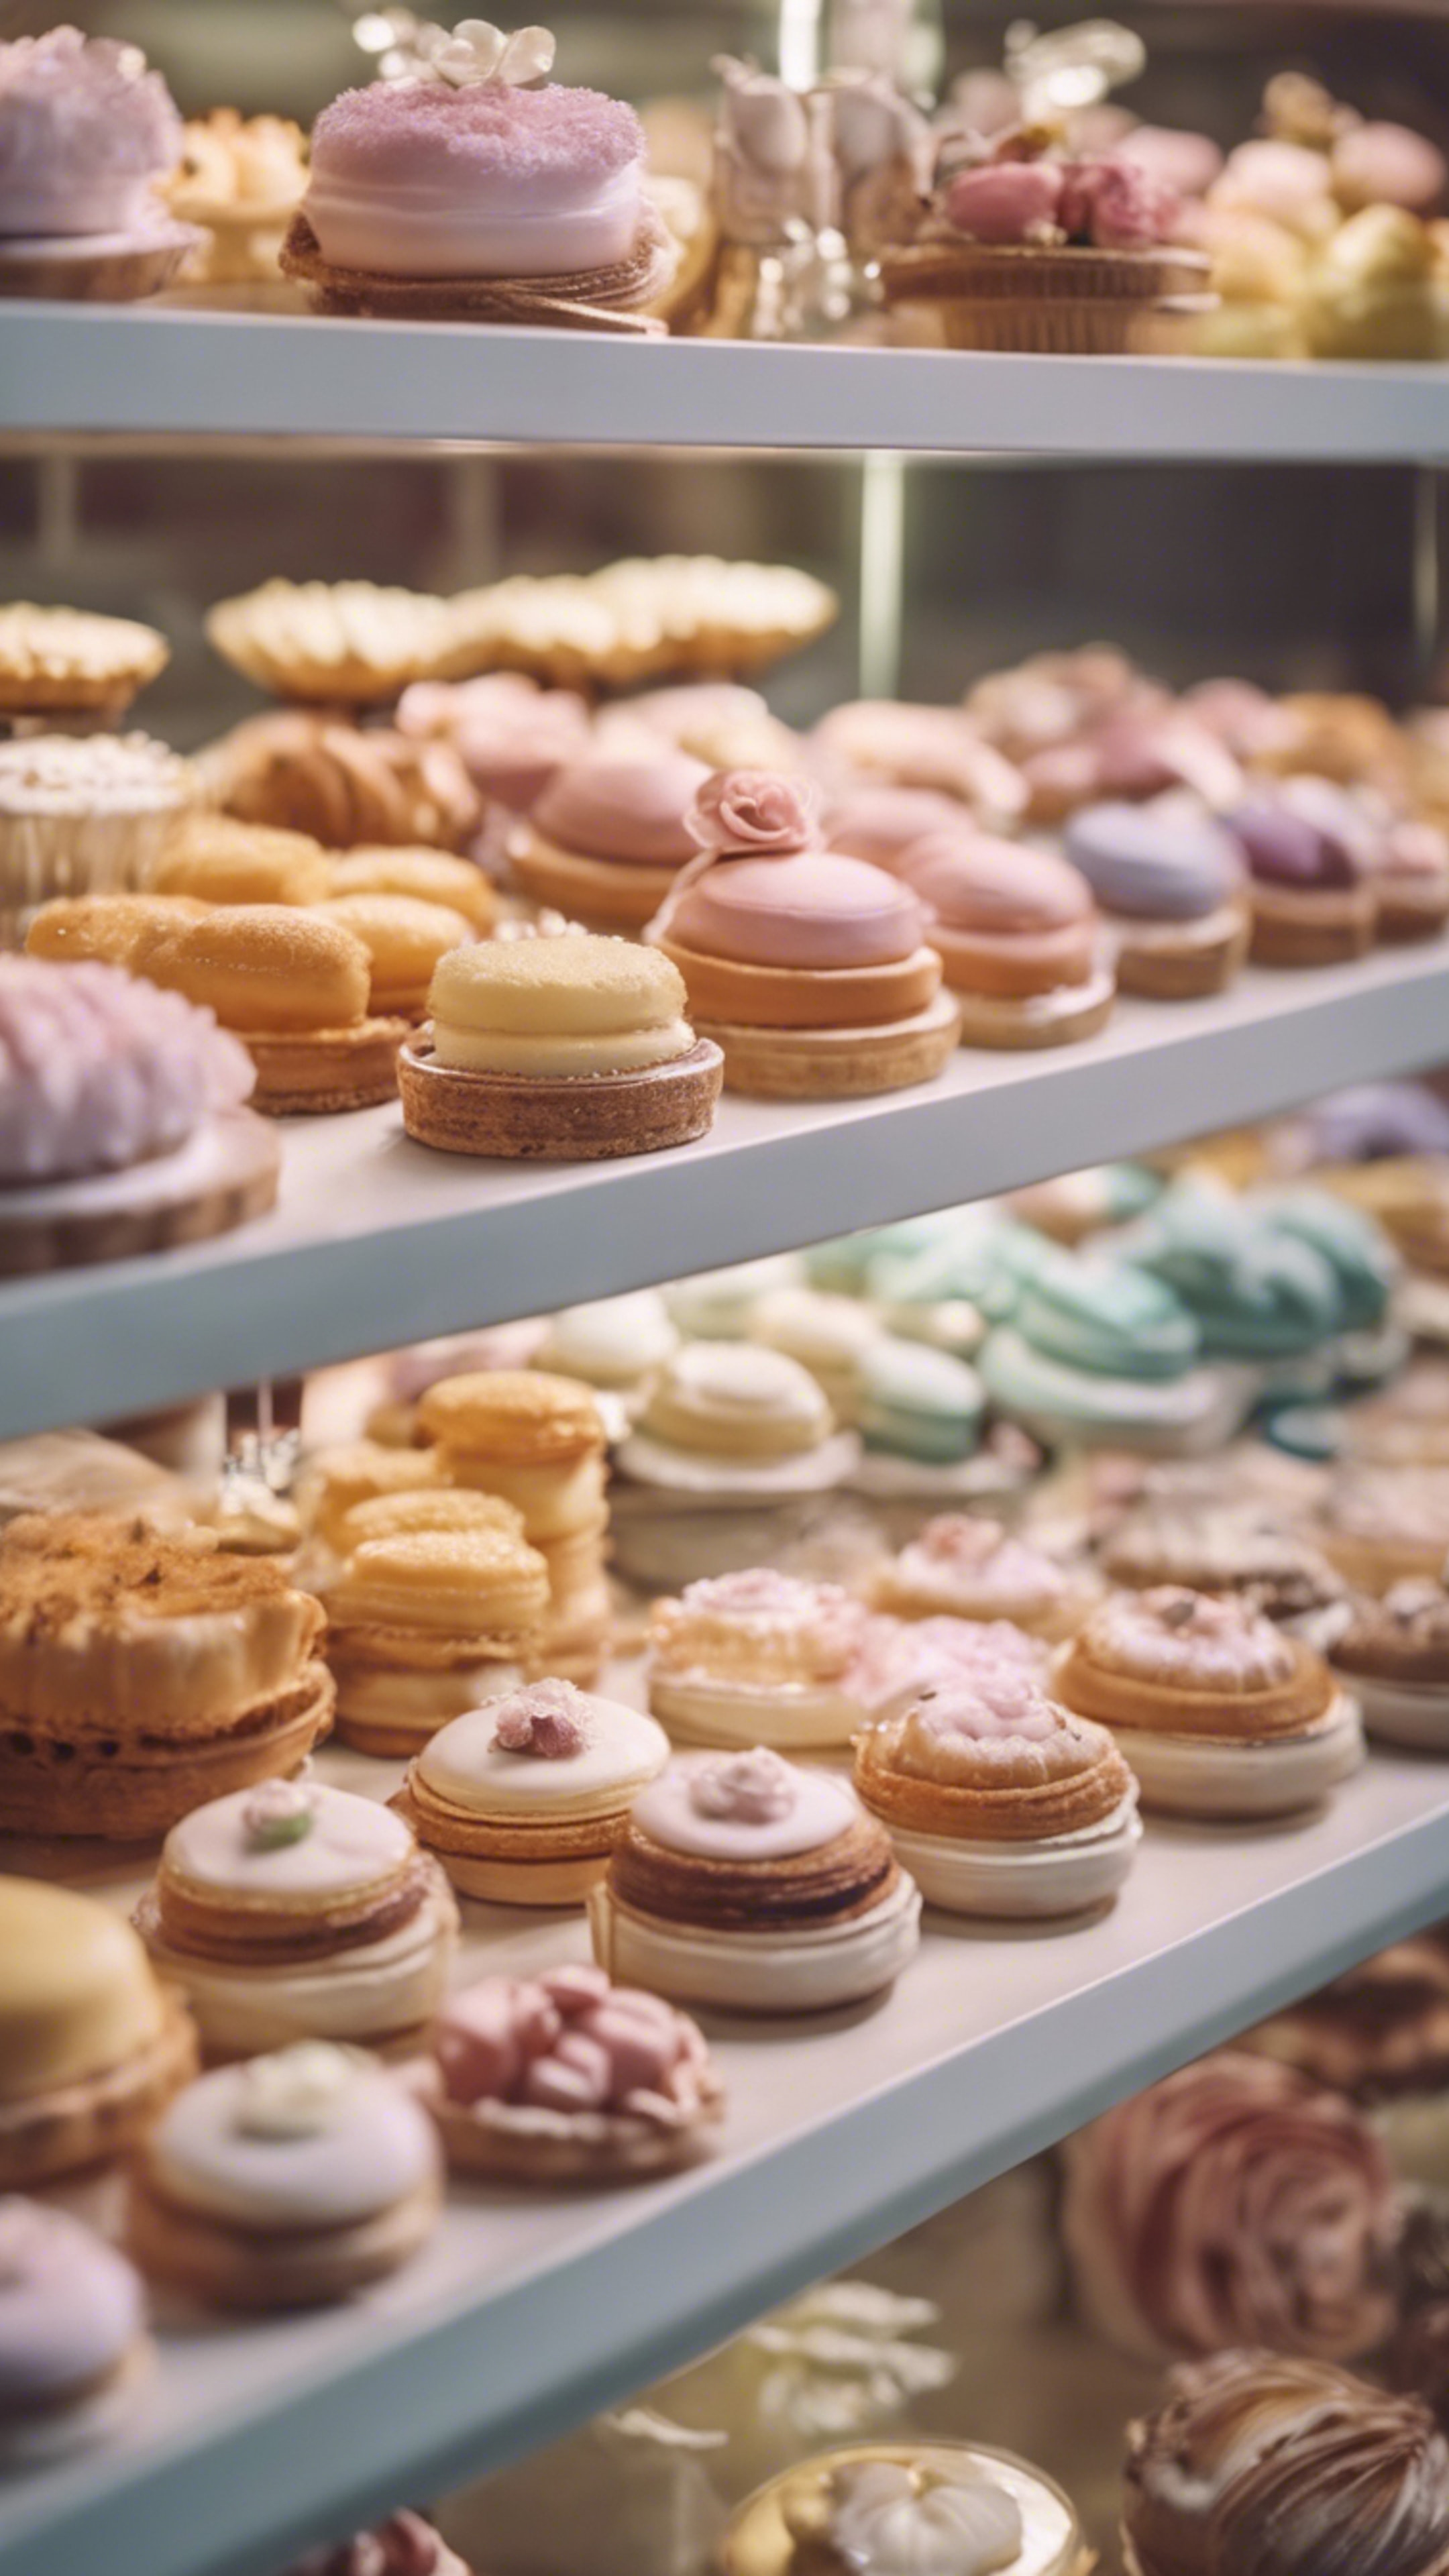 A classic French patisserie in pastel colors, filled with elegantly fashioned cakes and pastries. Tapeta[85bb484f9d7f40c5ac29]